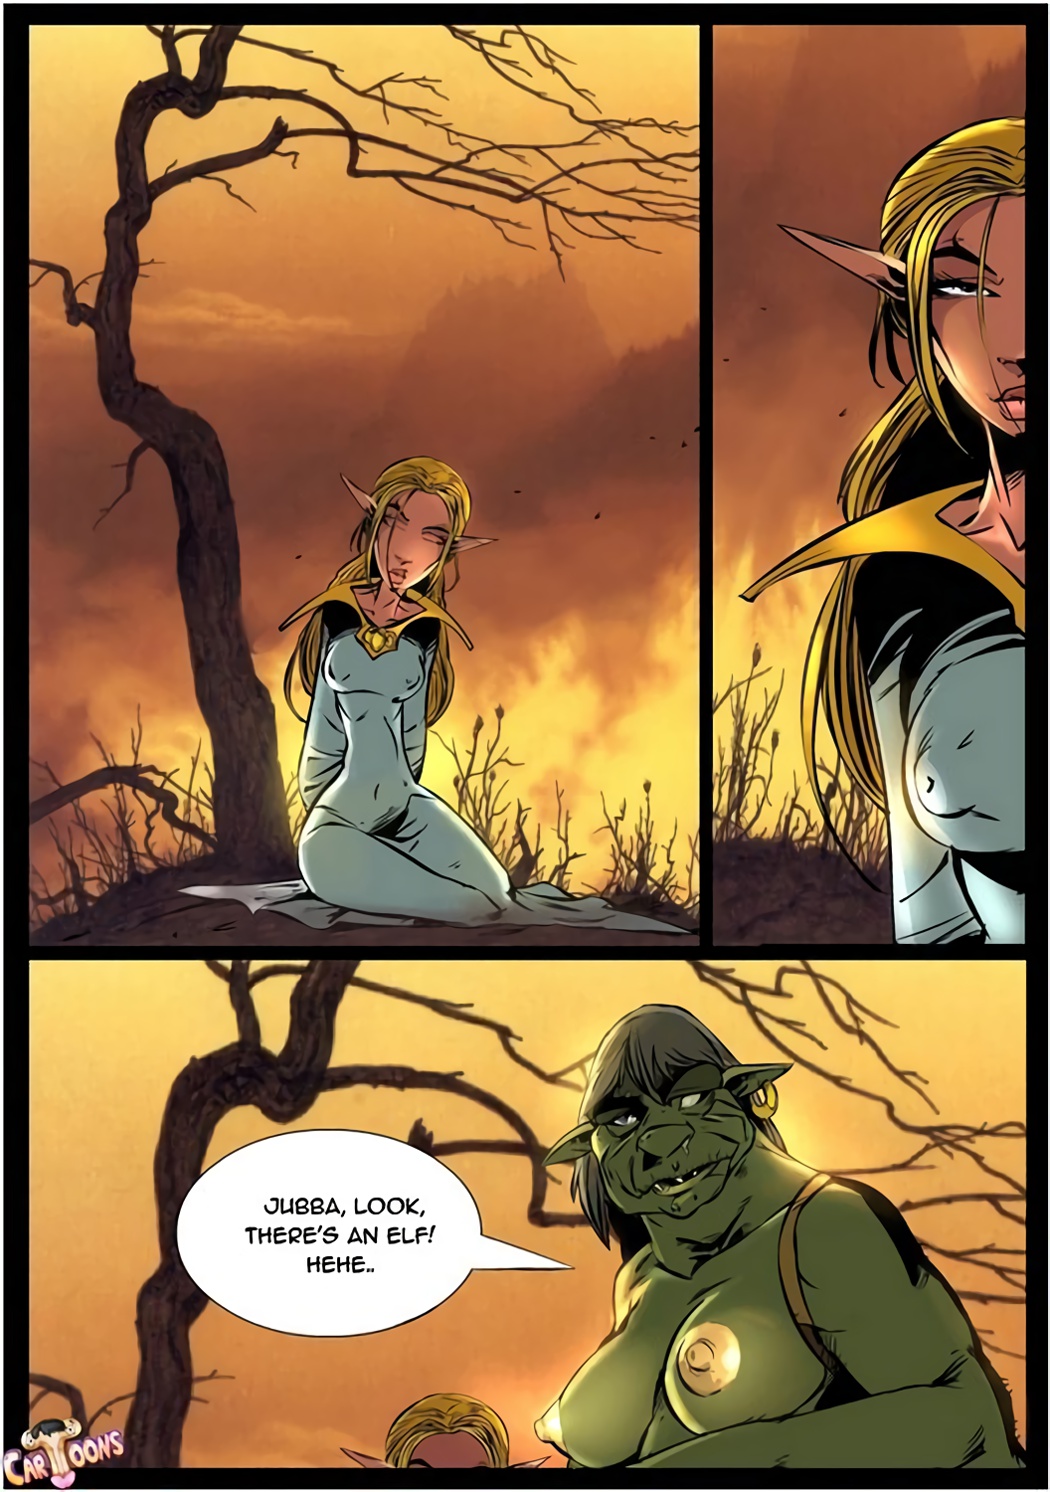 Elf Porn Shemale - Shemale Orc Fucking Elf - okunev (t-cartoons) porn comic parody on world of  warcraft. Group porn comics.